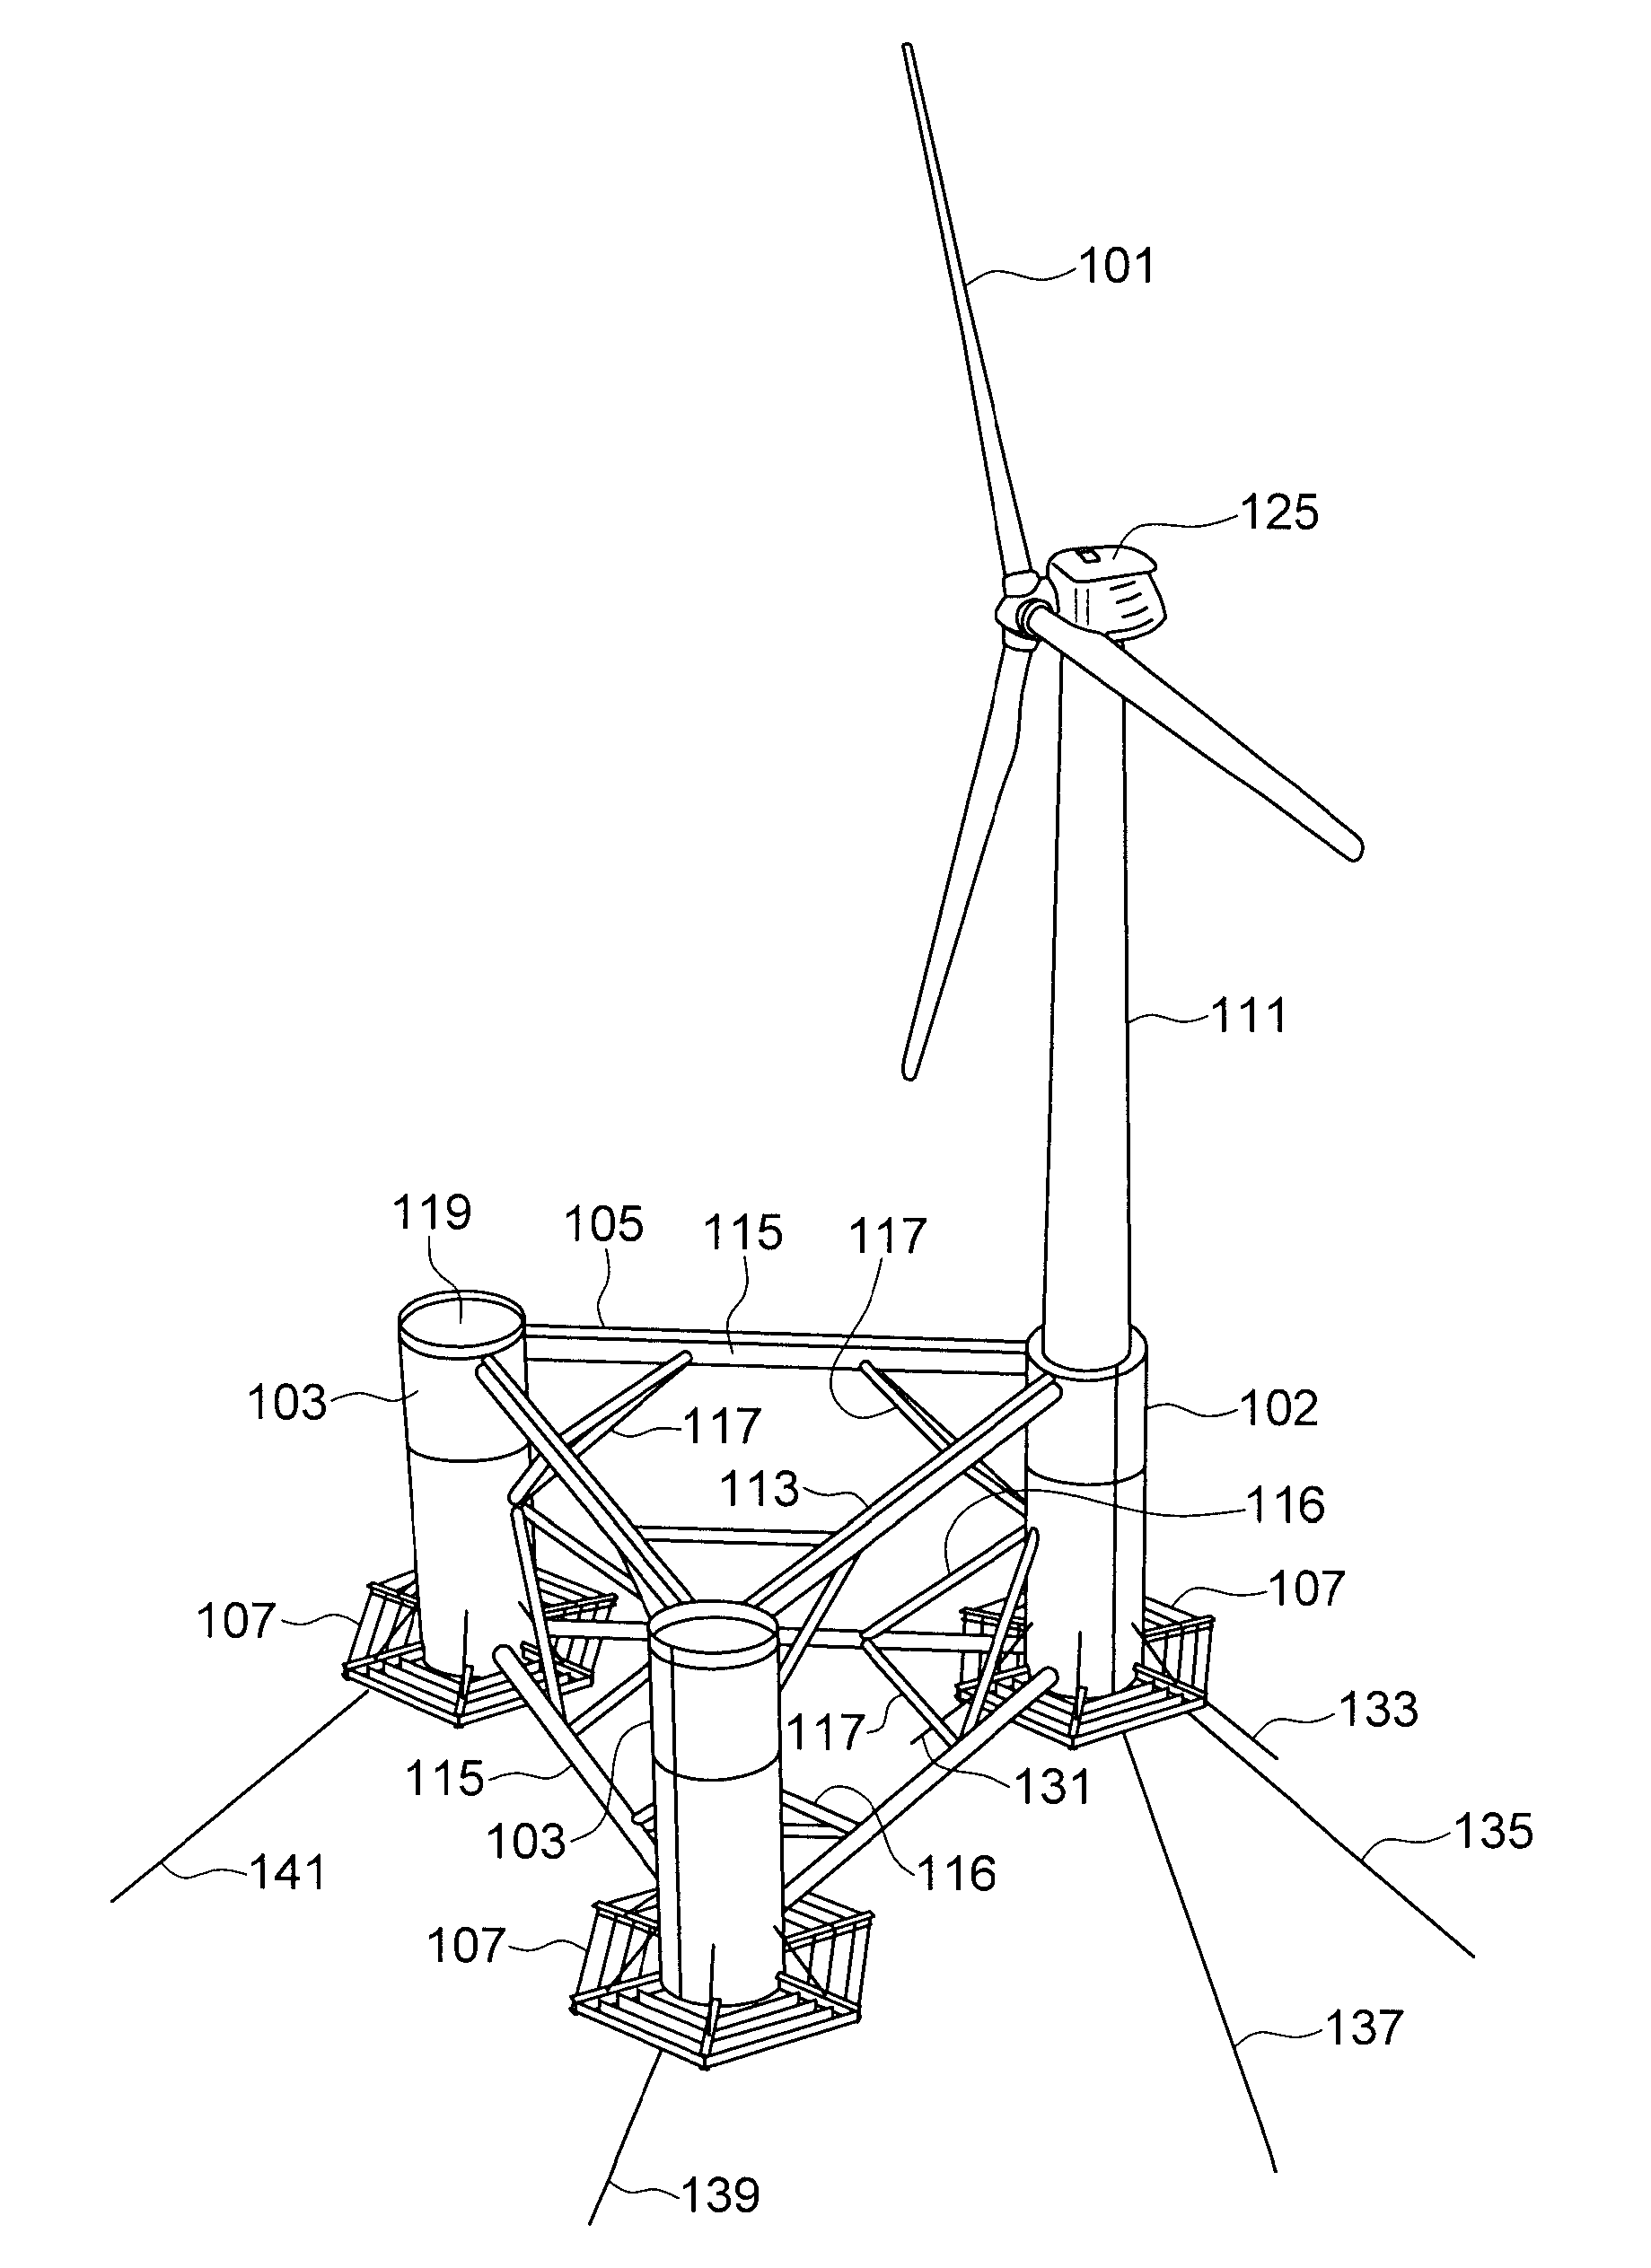 Column-stabilized offshore platform with water-entrapment plates and asymmetric mooring system for support of offshore wind turbines